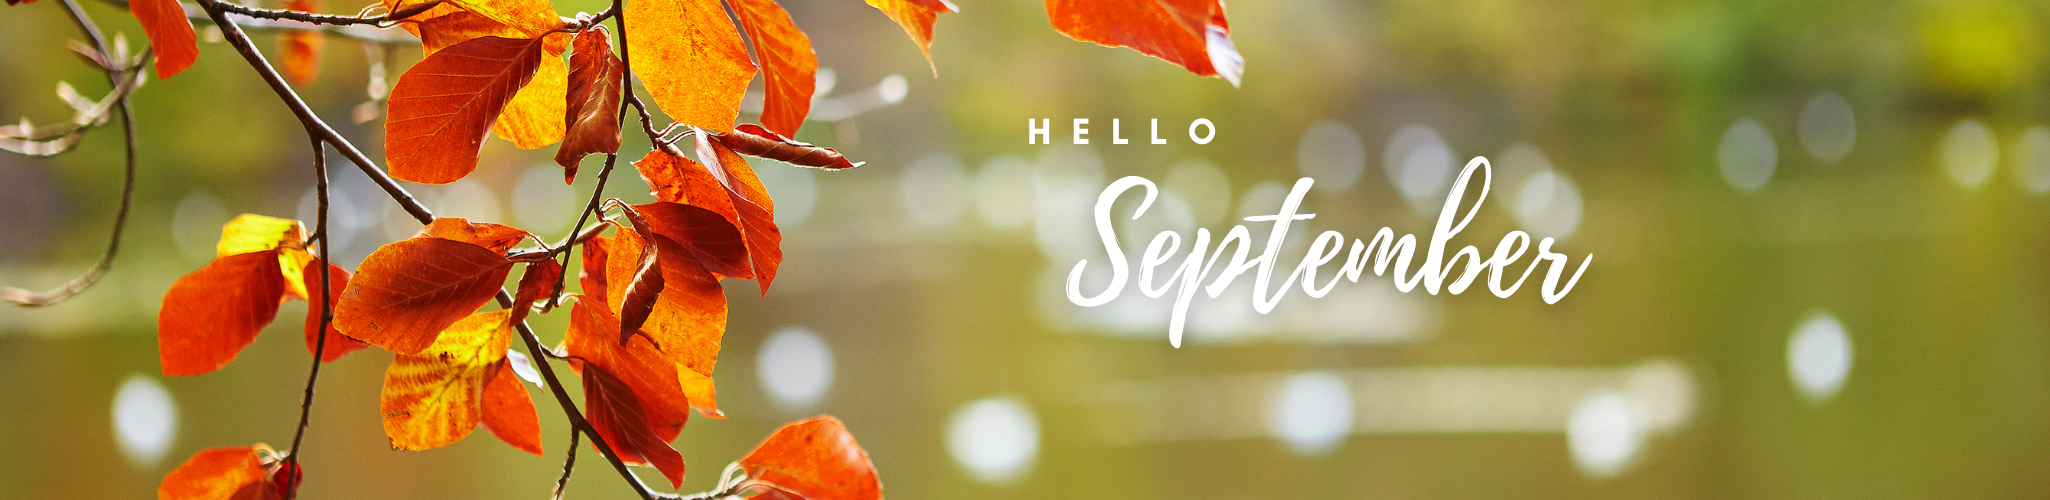 Hello September with Fall Leaves